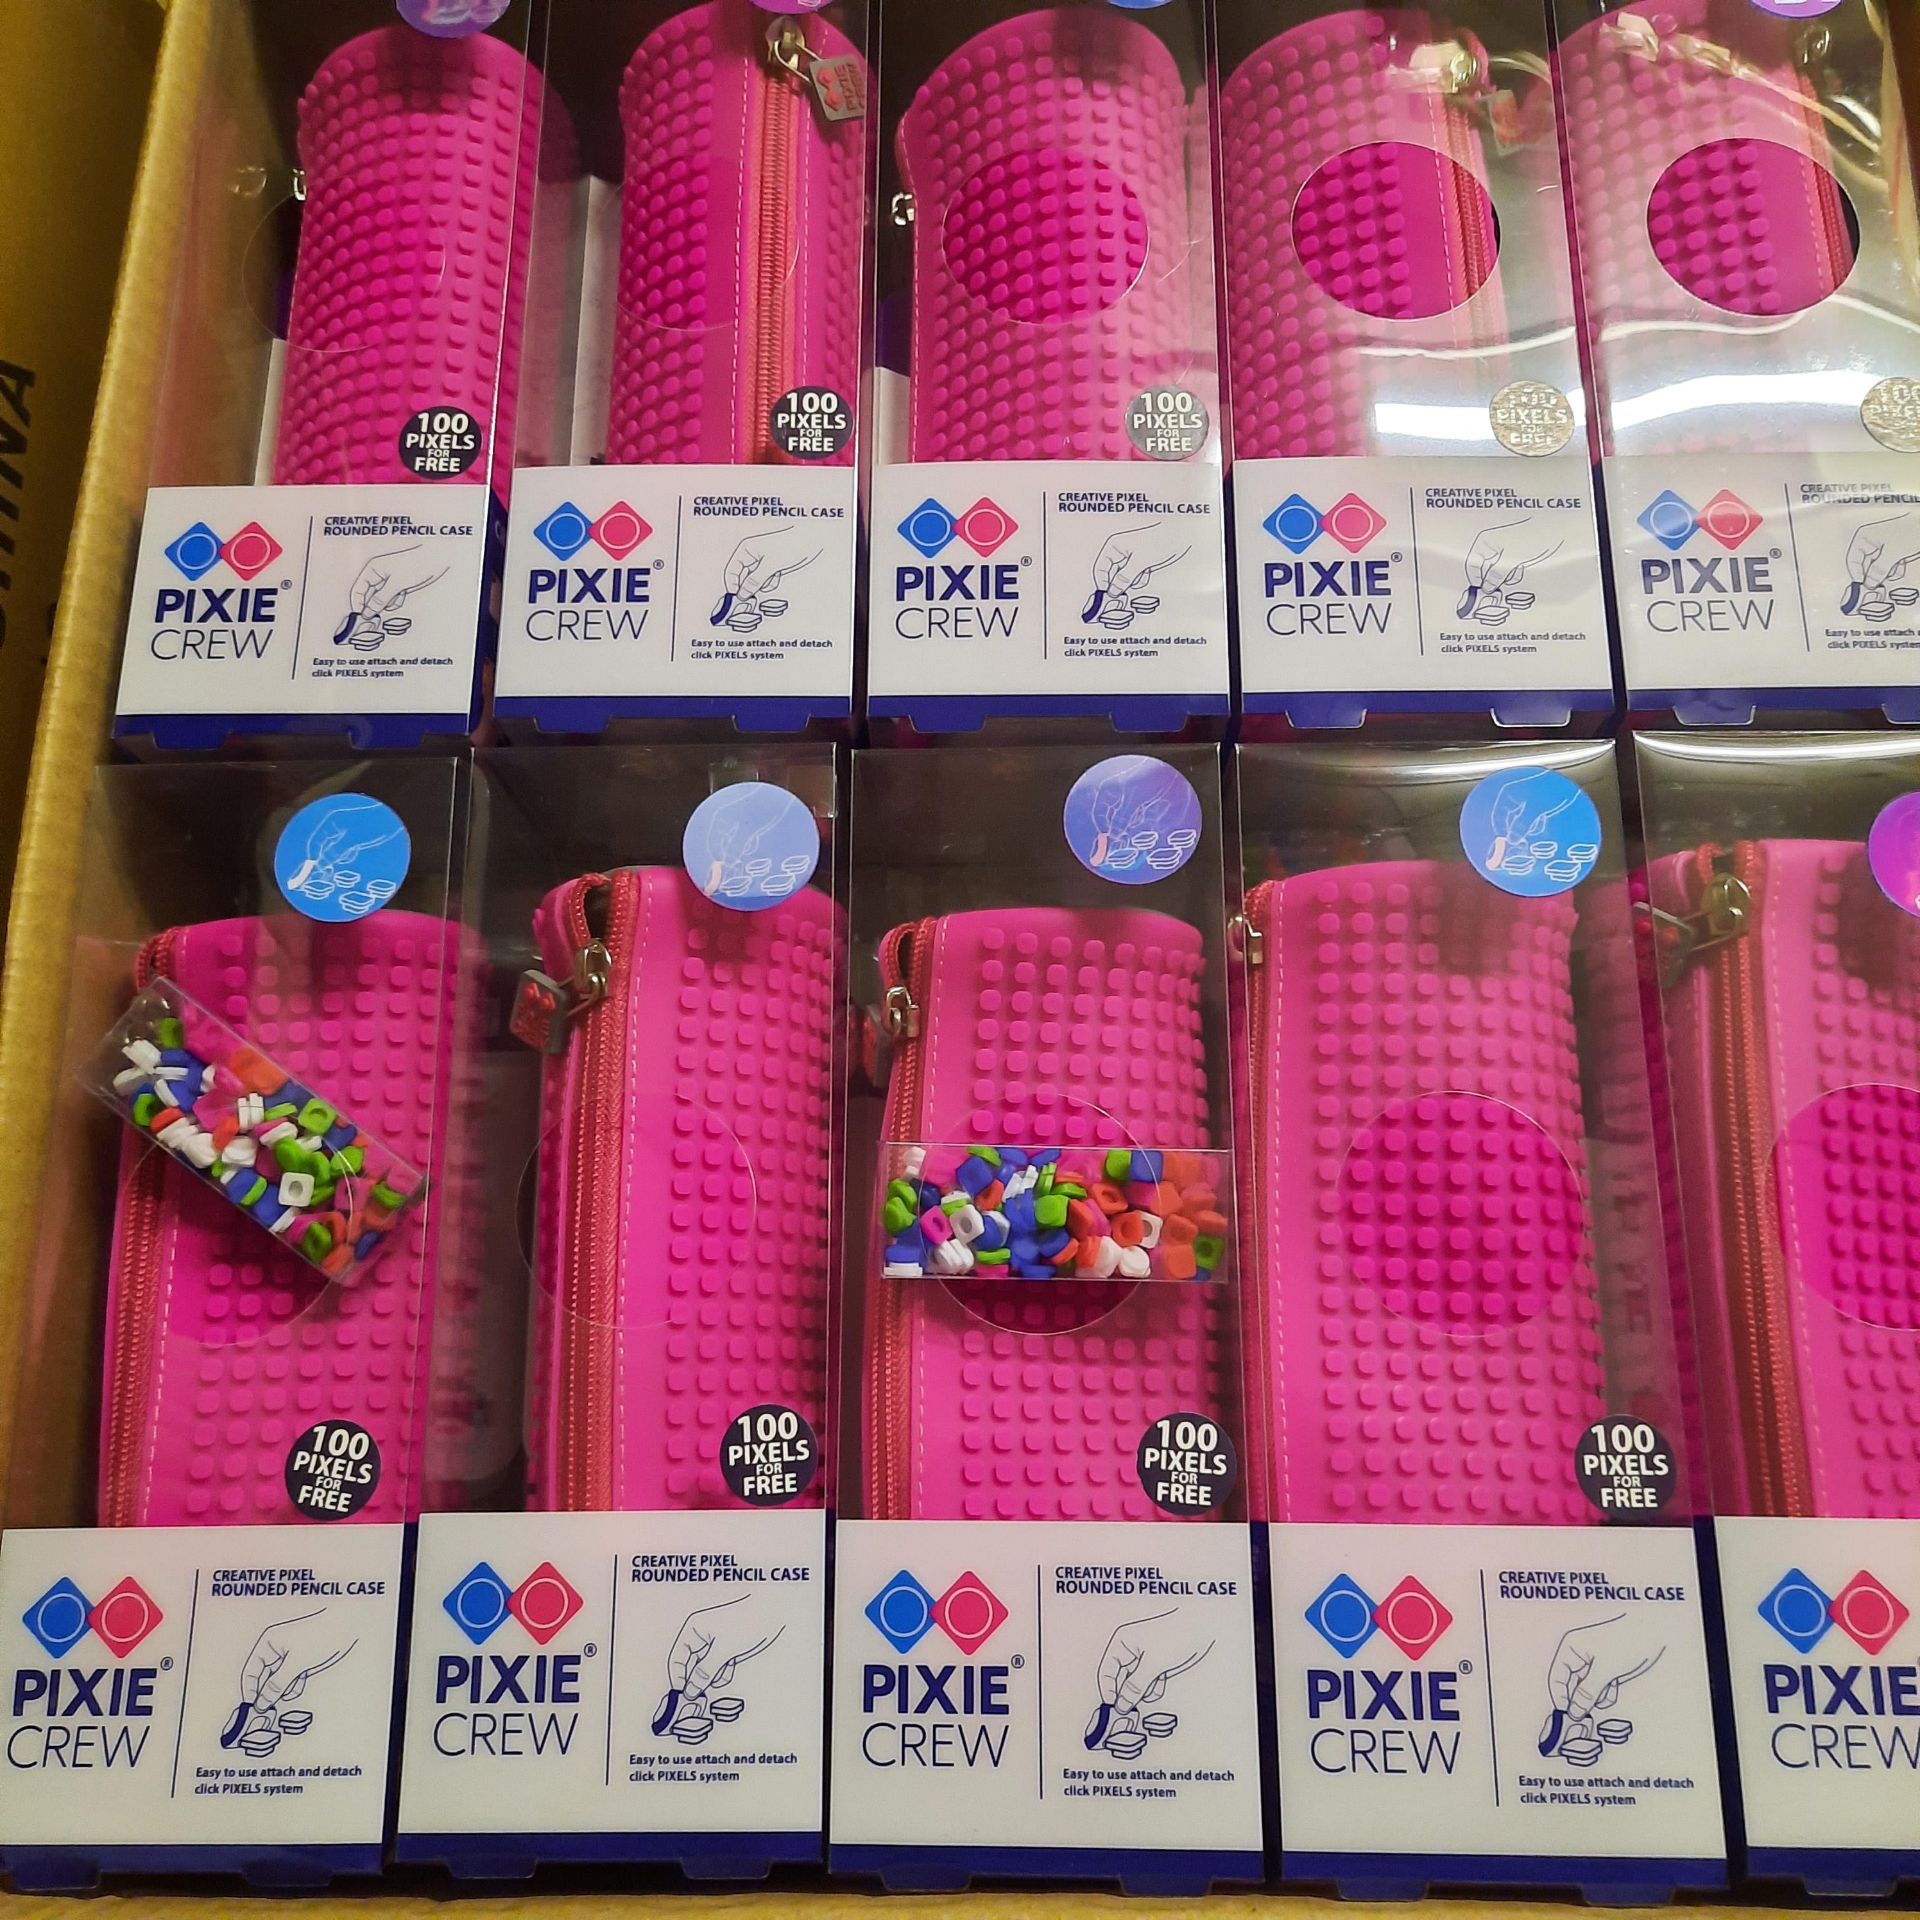 X 3 BRAND NEW PIXEL CREW CREATIVE ROUNDED PENCIL CASE WITH 100 PIXIE FOR FREE - PINK. TOTAL RRP £